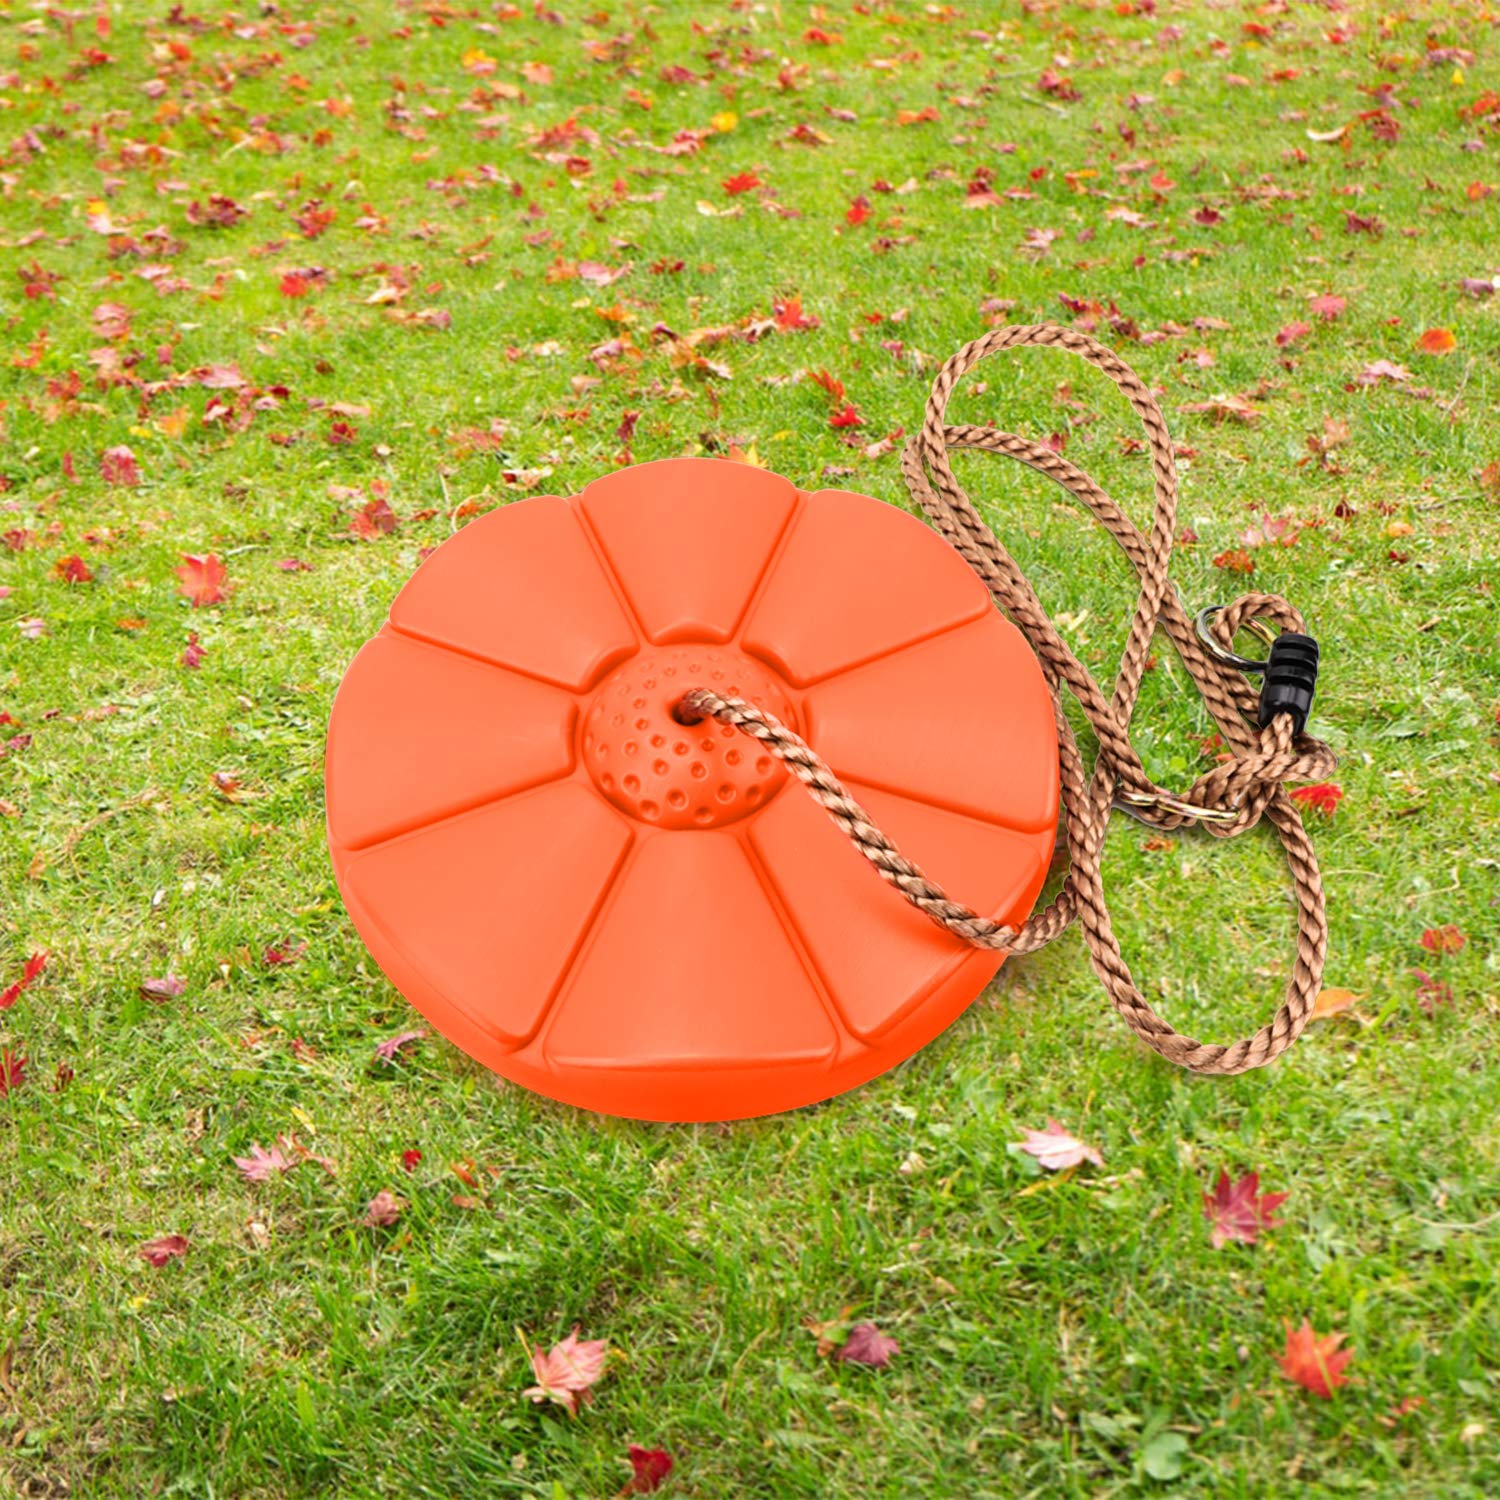 Sorbus disc seat swing for outdoors and playground fun